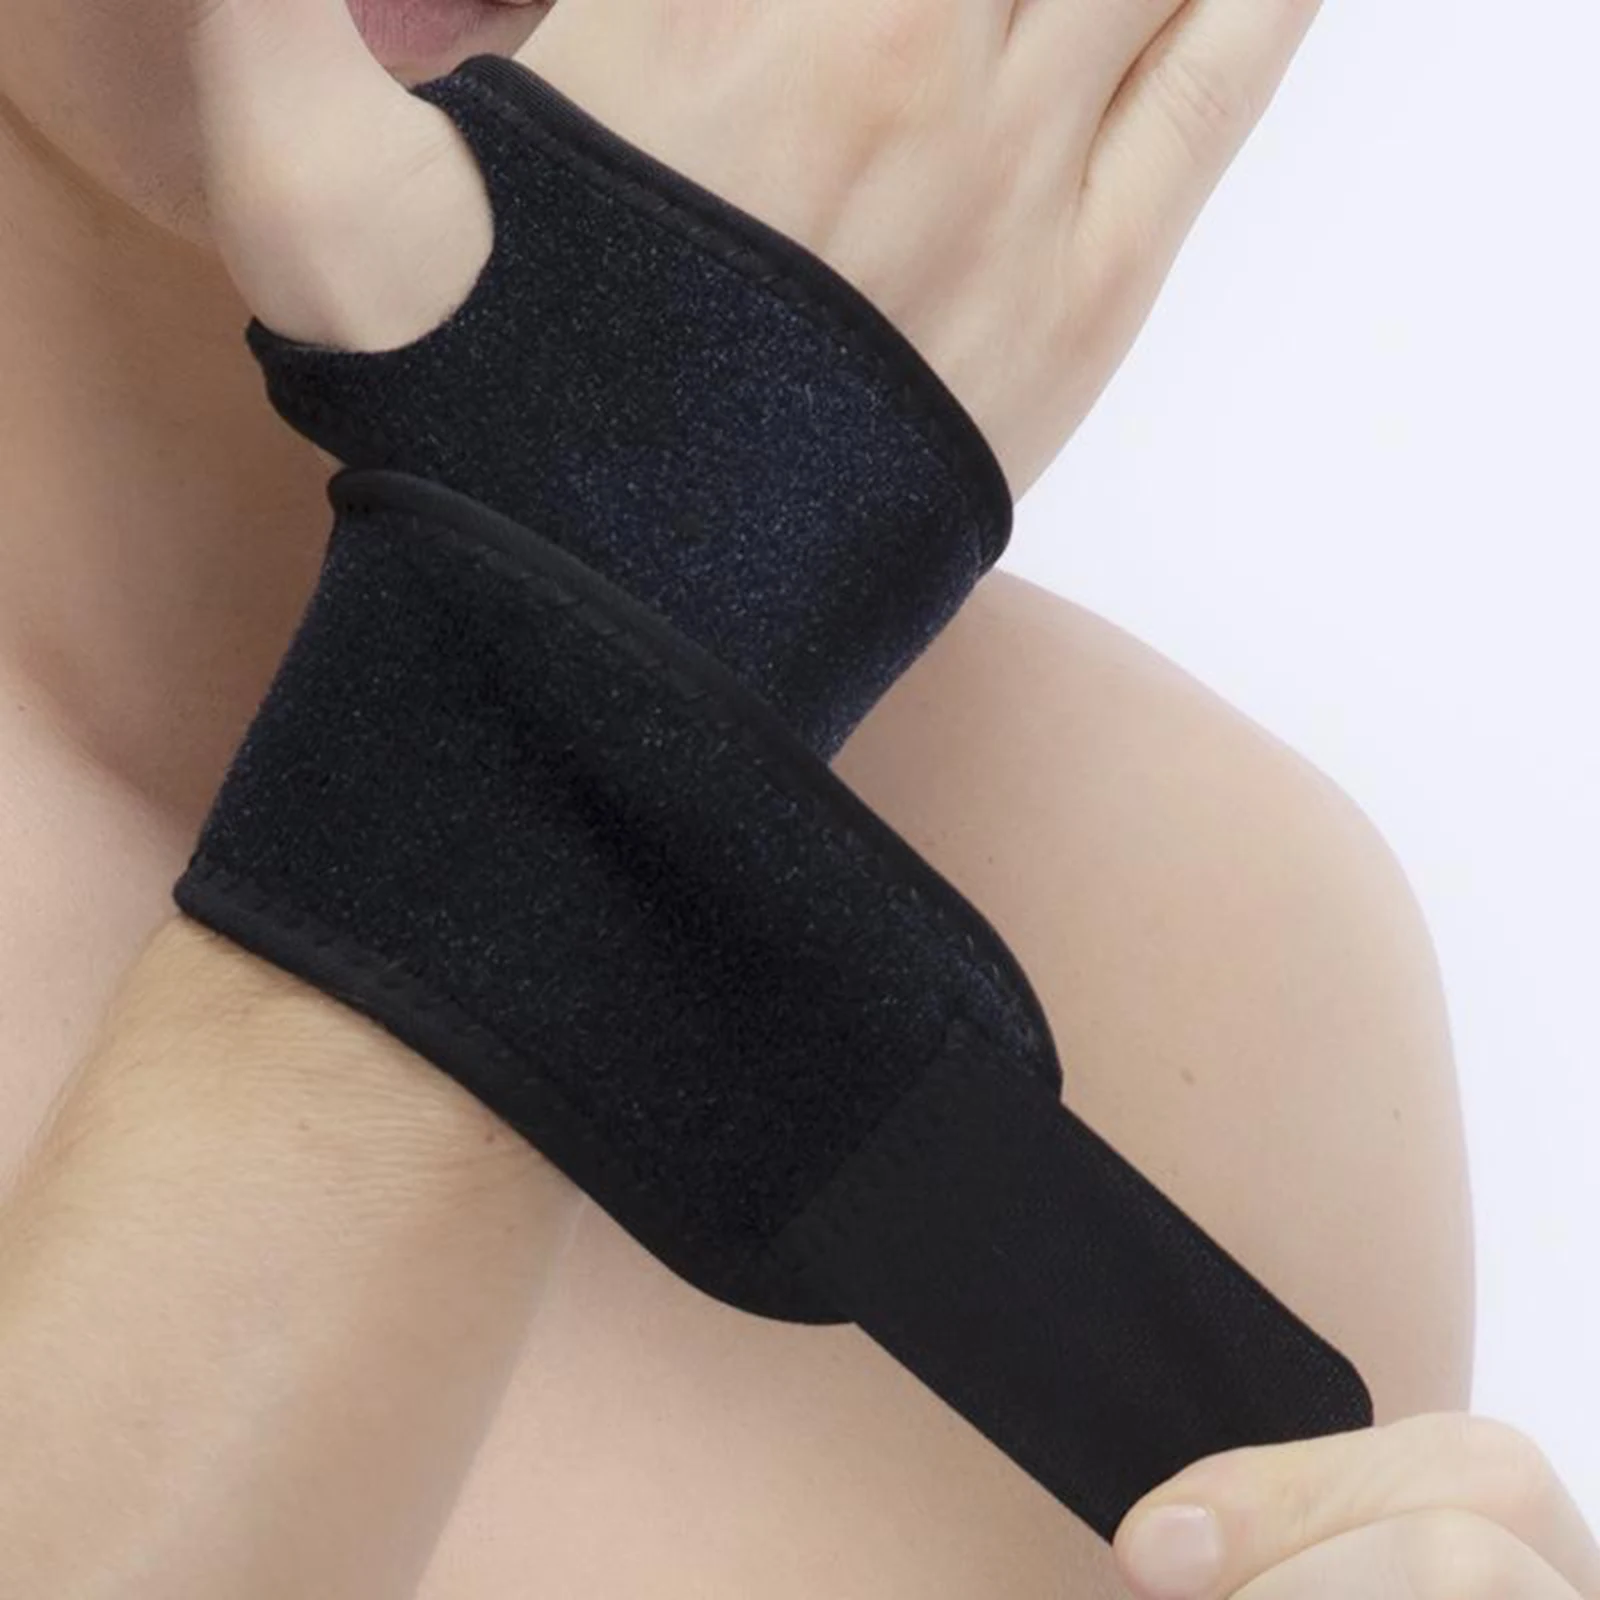 Premium Lined Wrist Support Wrist Strap Carpal Tunnel Wrist Brace Fits Both Hands Wrist Support Brace Injury Recovery